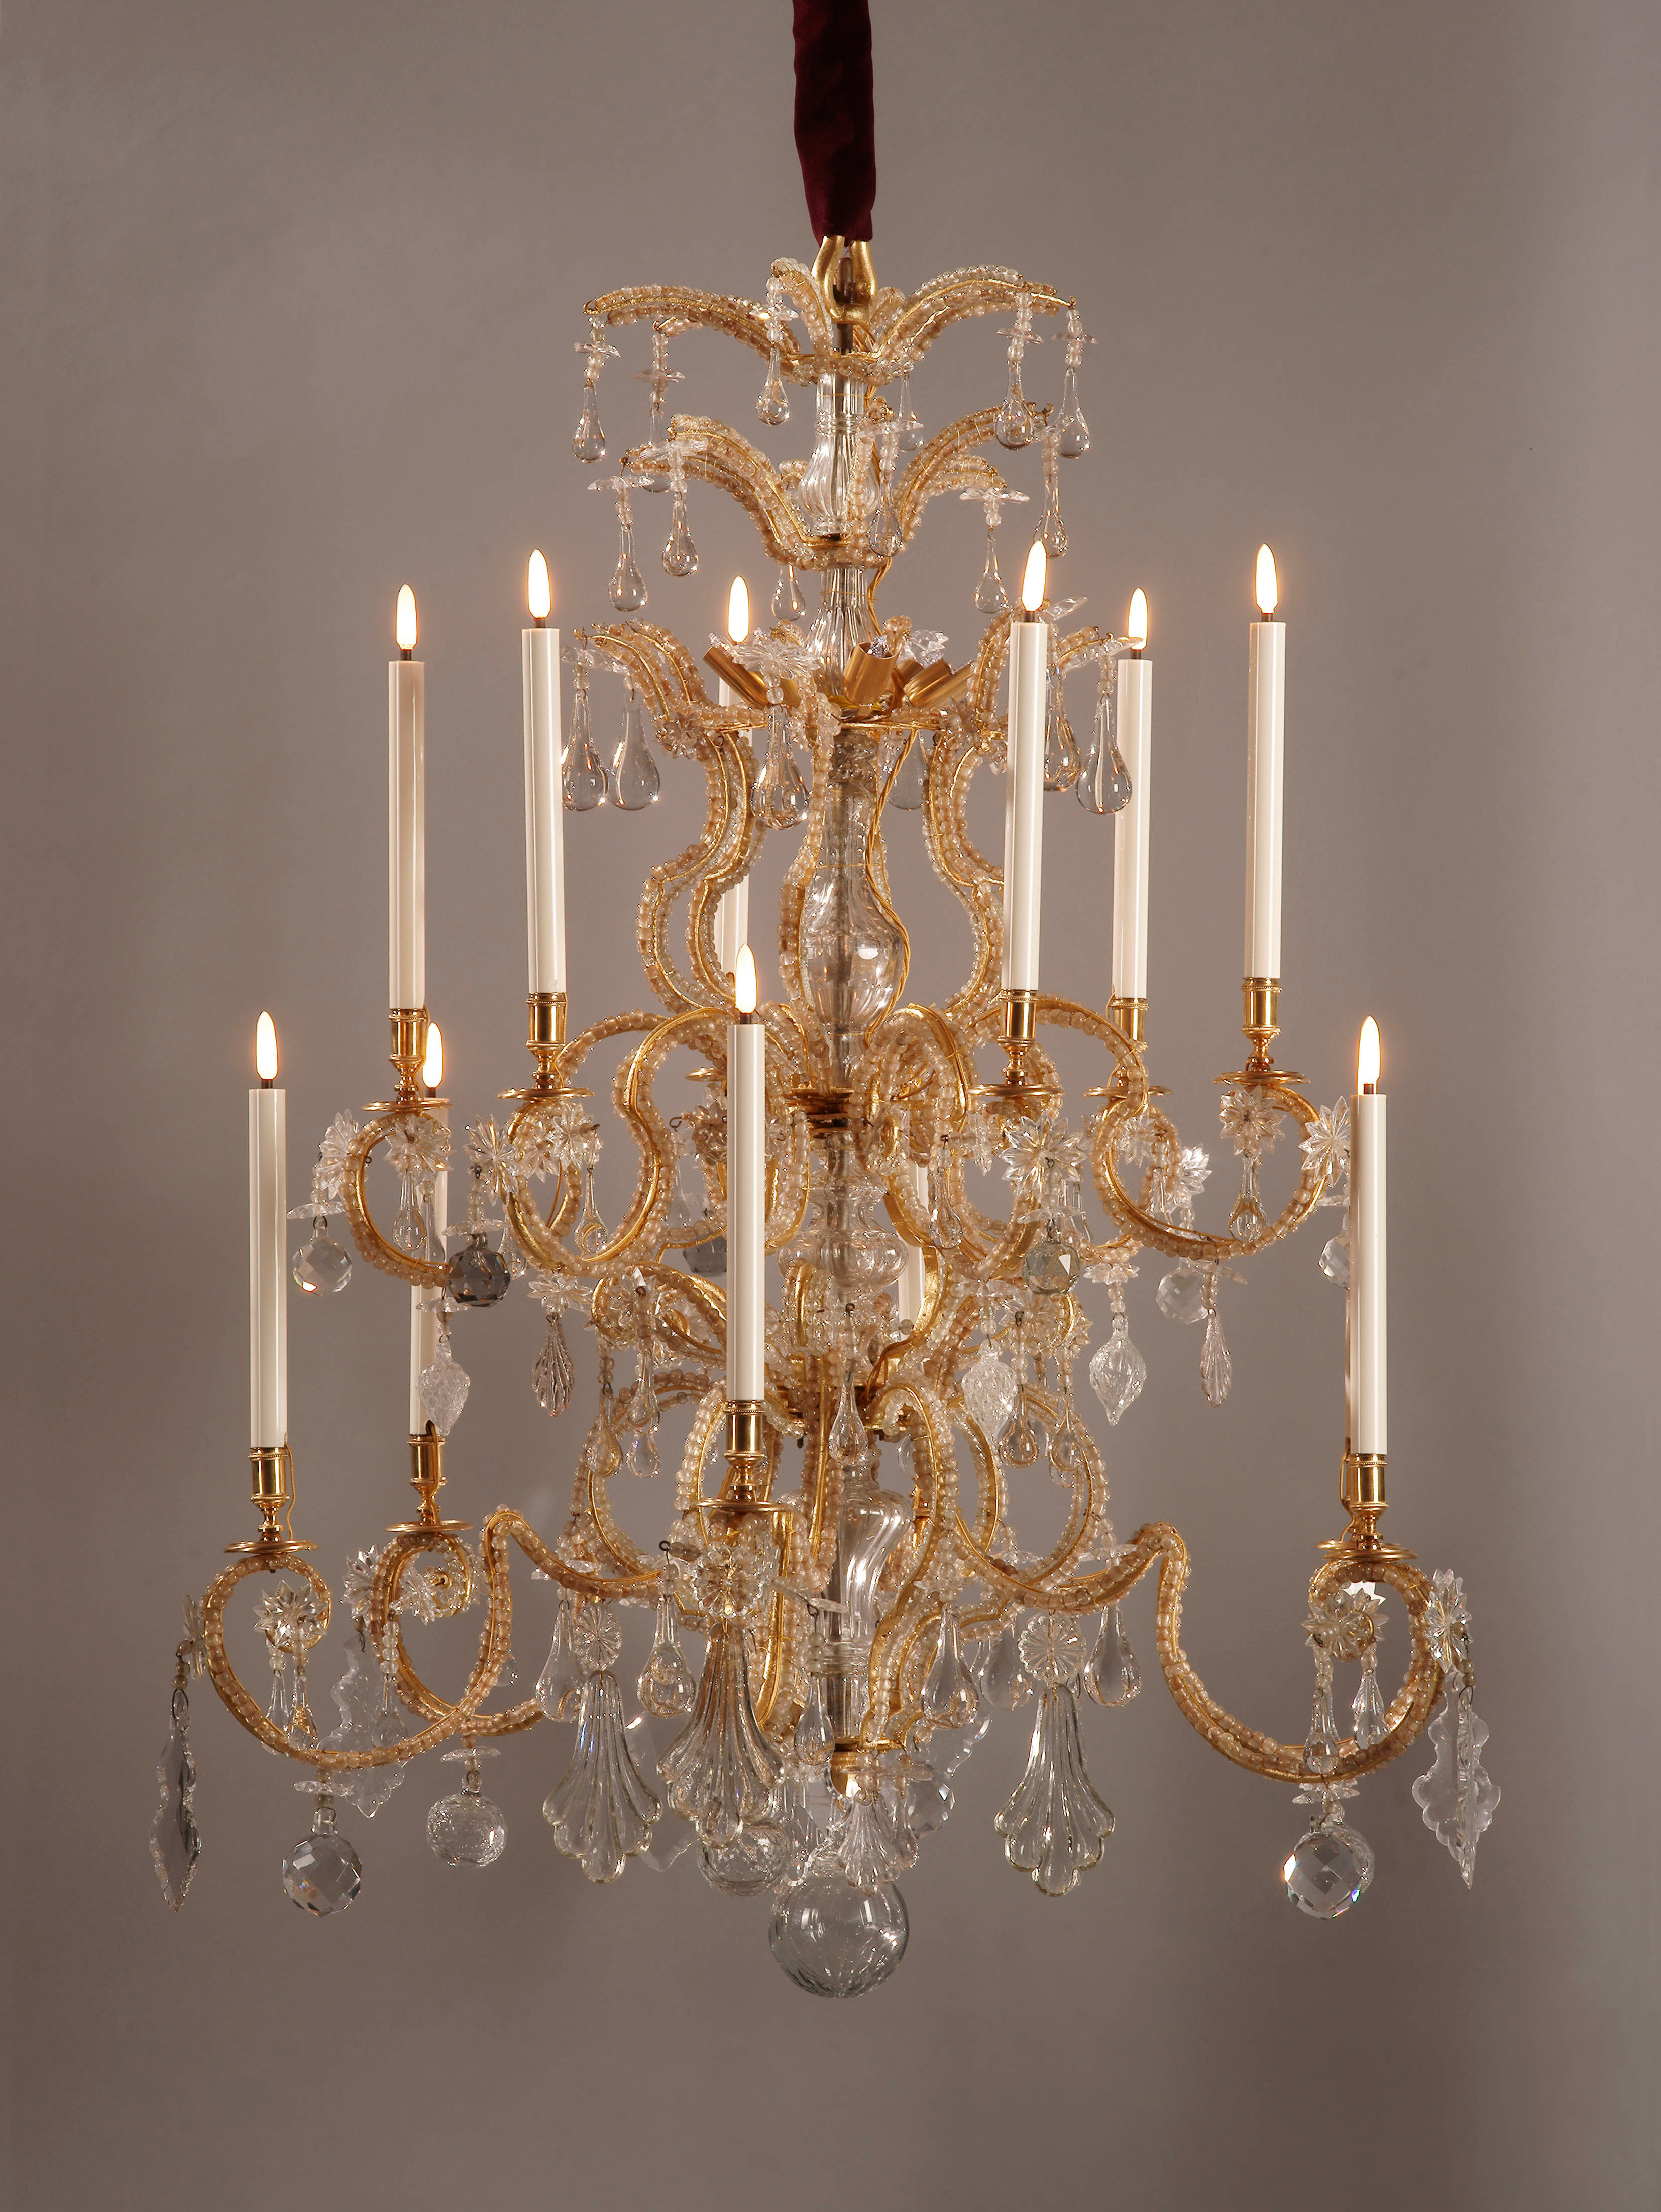 Large Genoese Chandelier with 12 lights